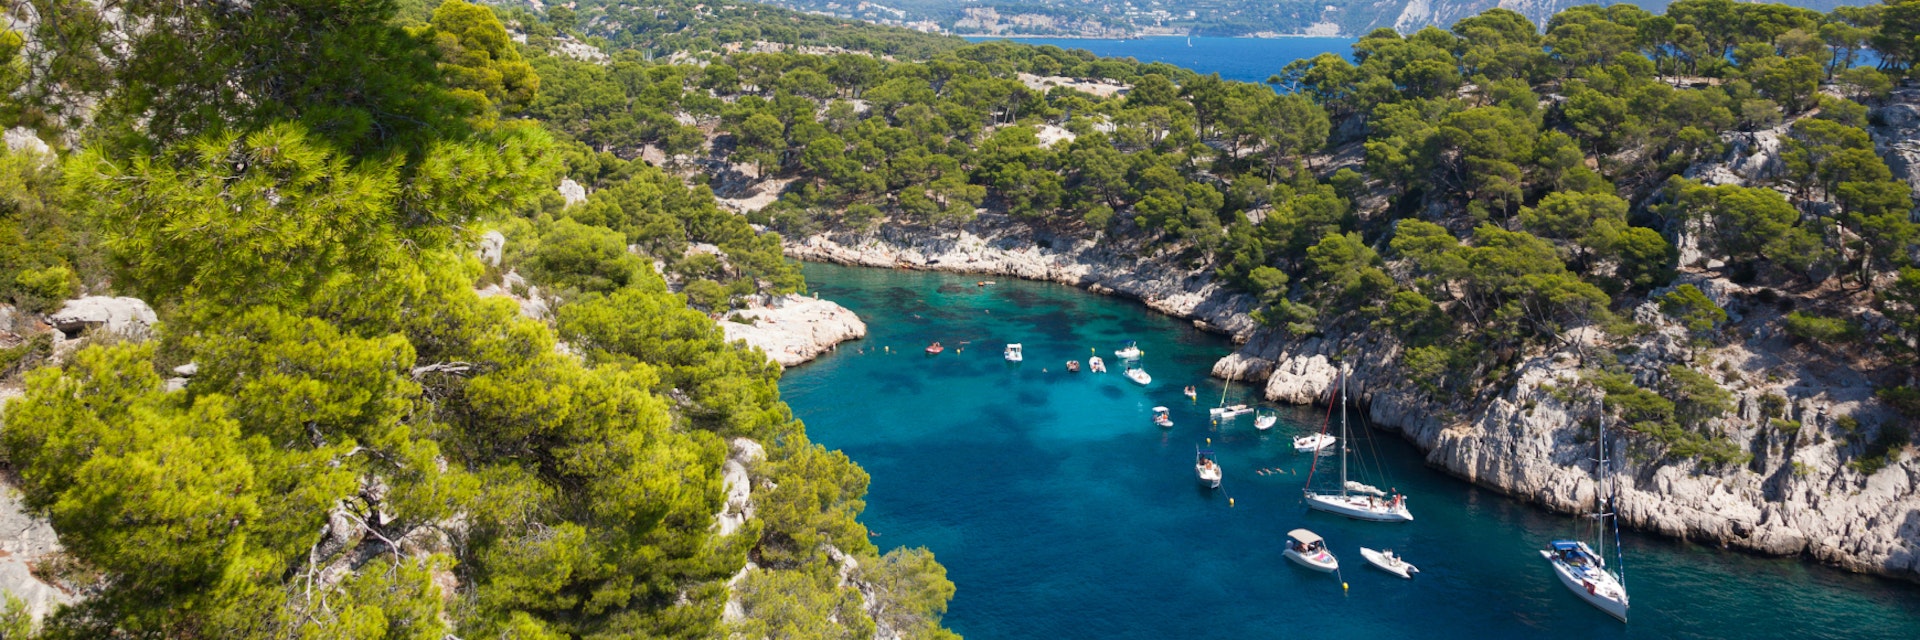 Calanques of Port Pin in Cassis  in France; Shutterstock ID 182827304